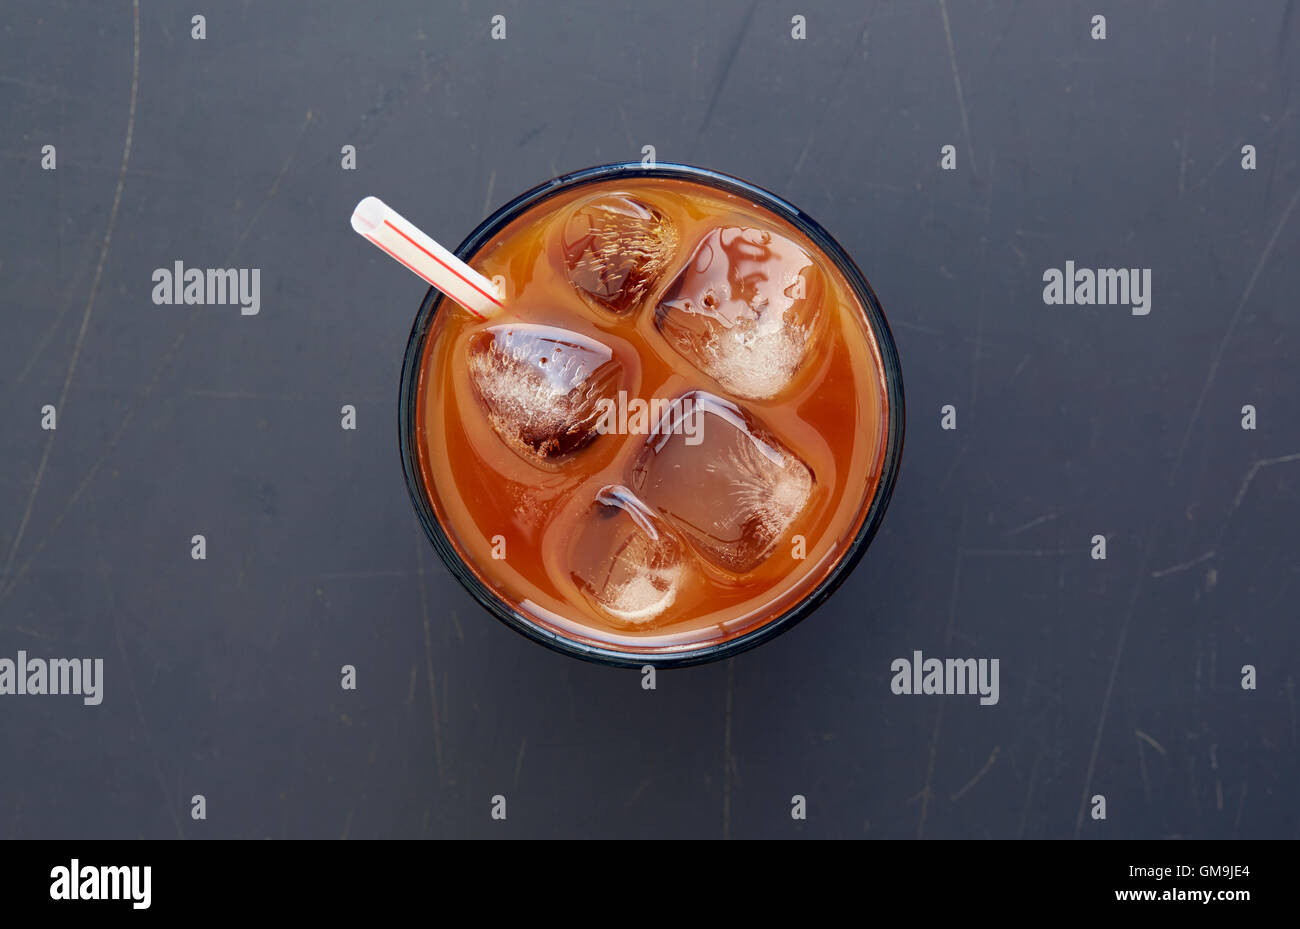 Overhead view of iced coffee with drinking straw Stock Photo